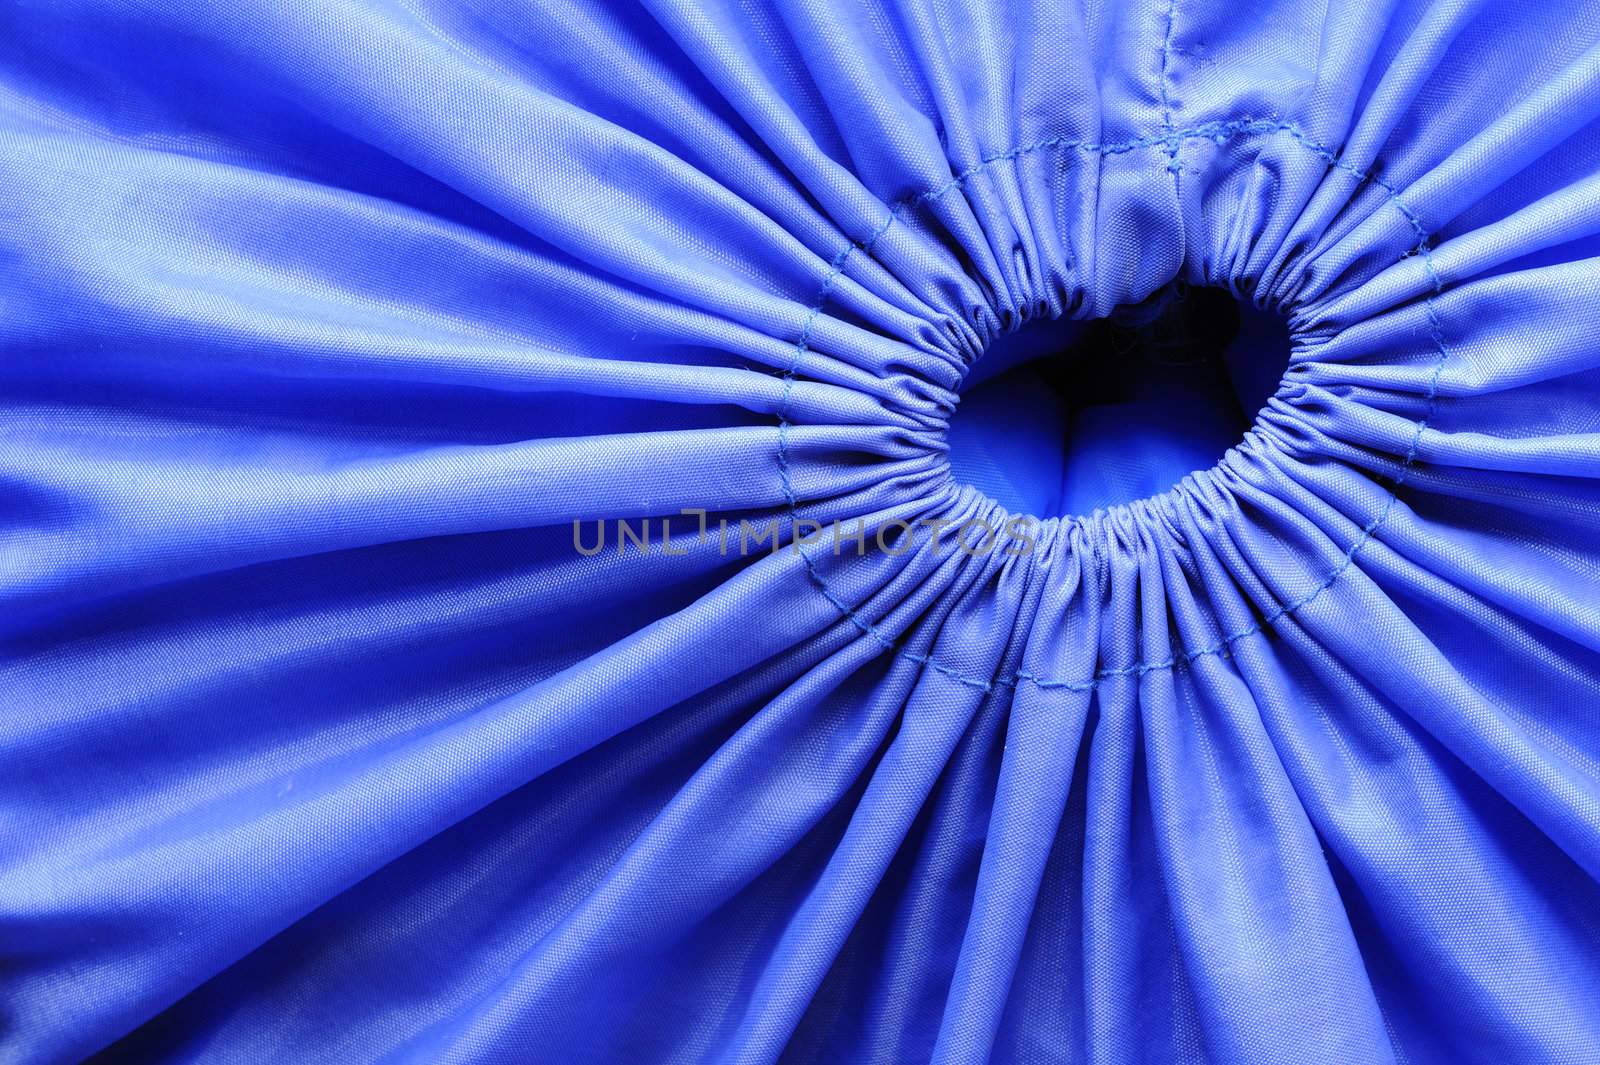 Macro image of the opening of a blue fabric bag, drawn tight closed by a drawstring.